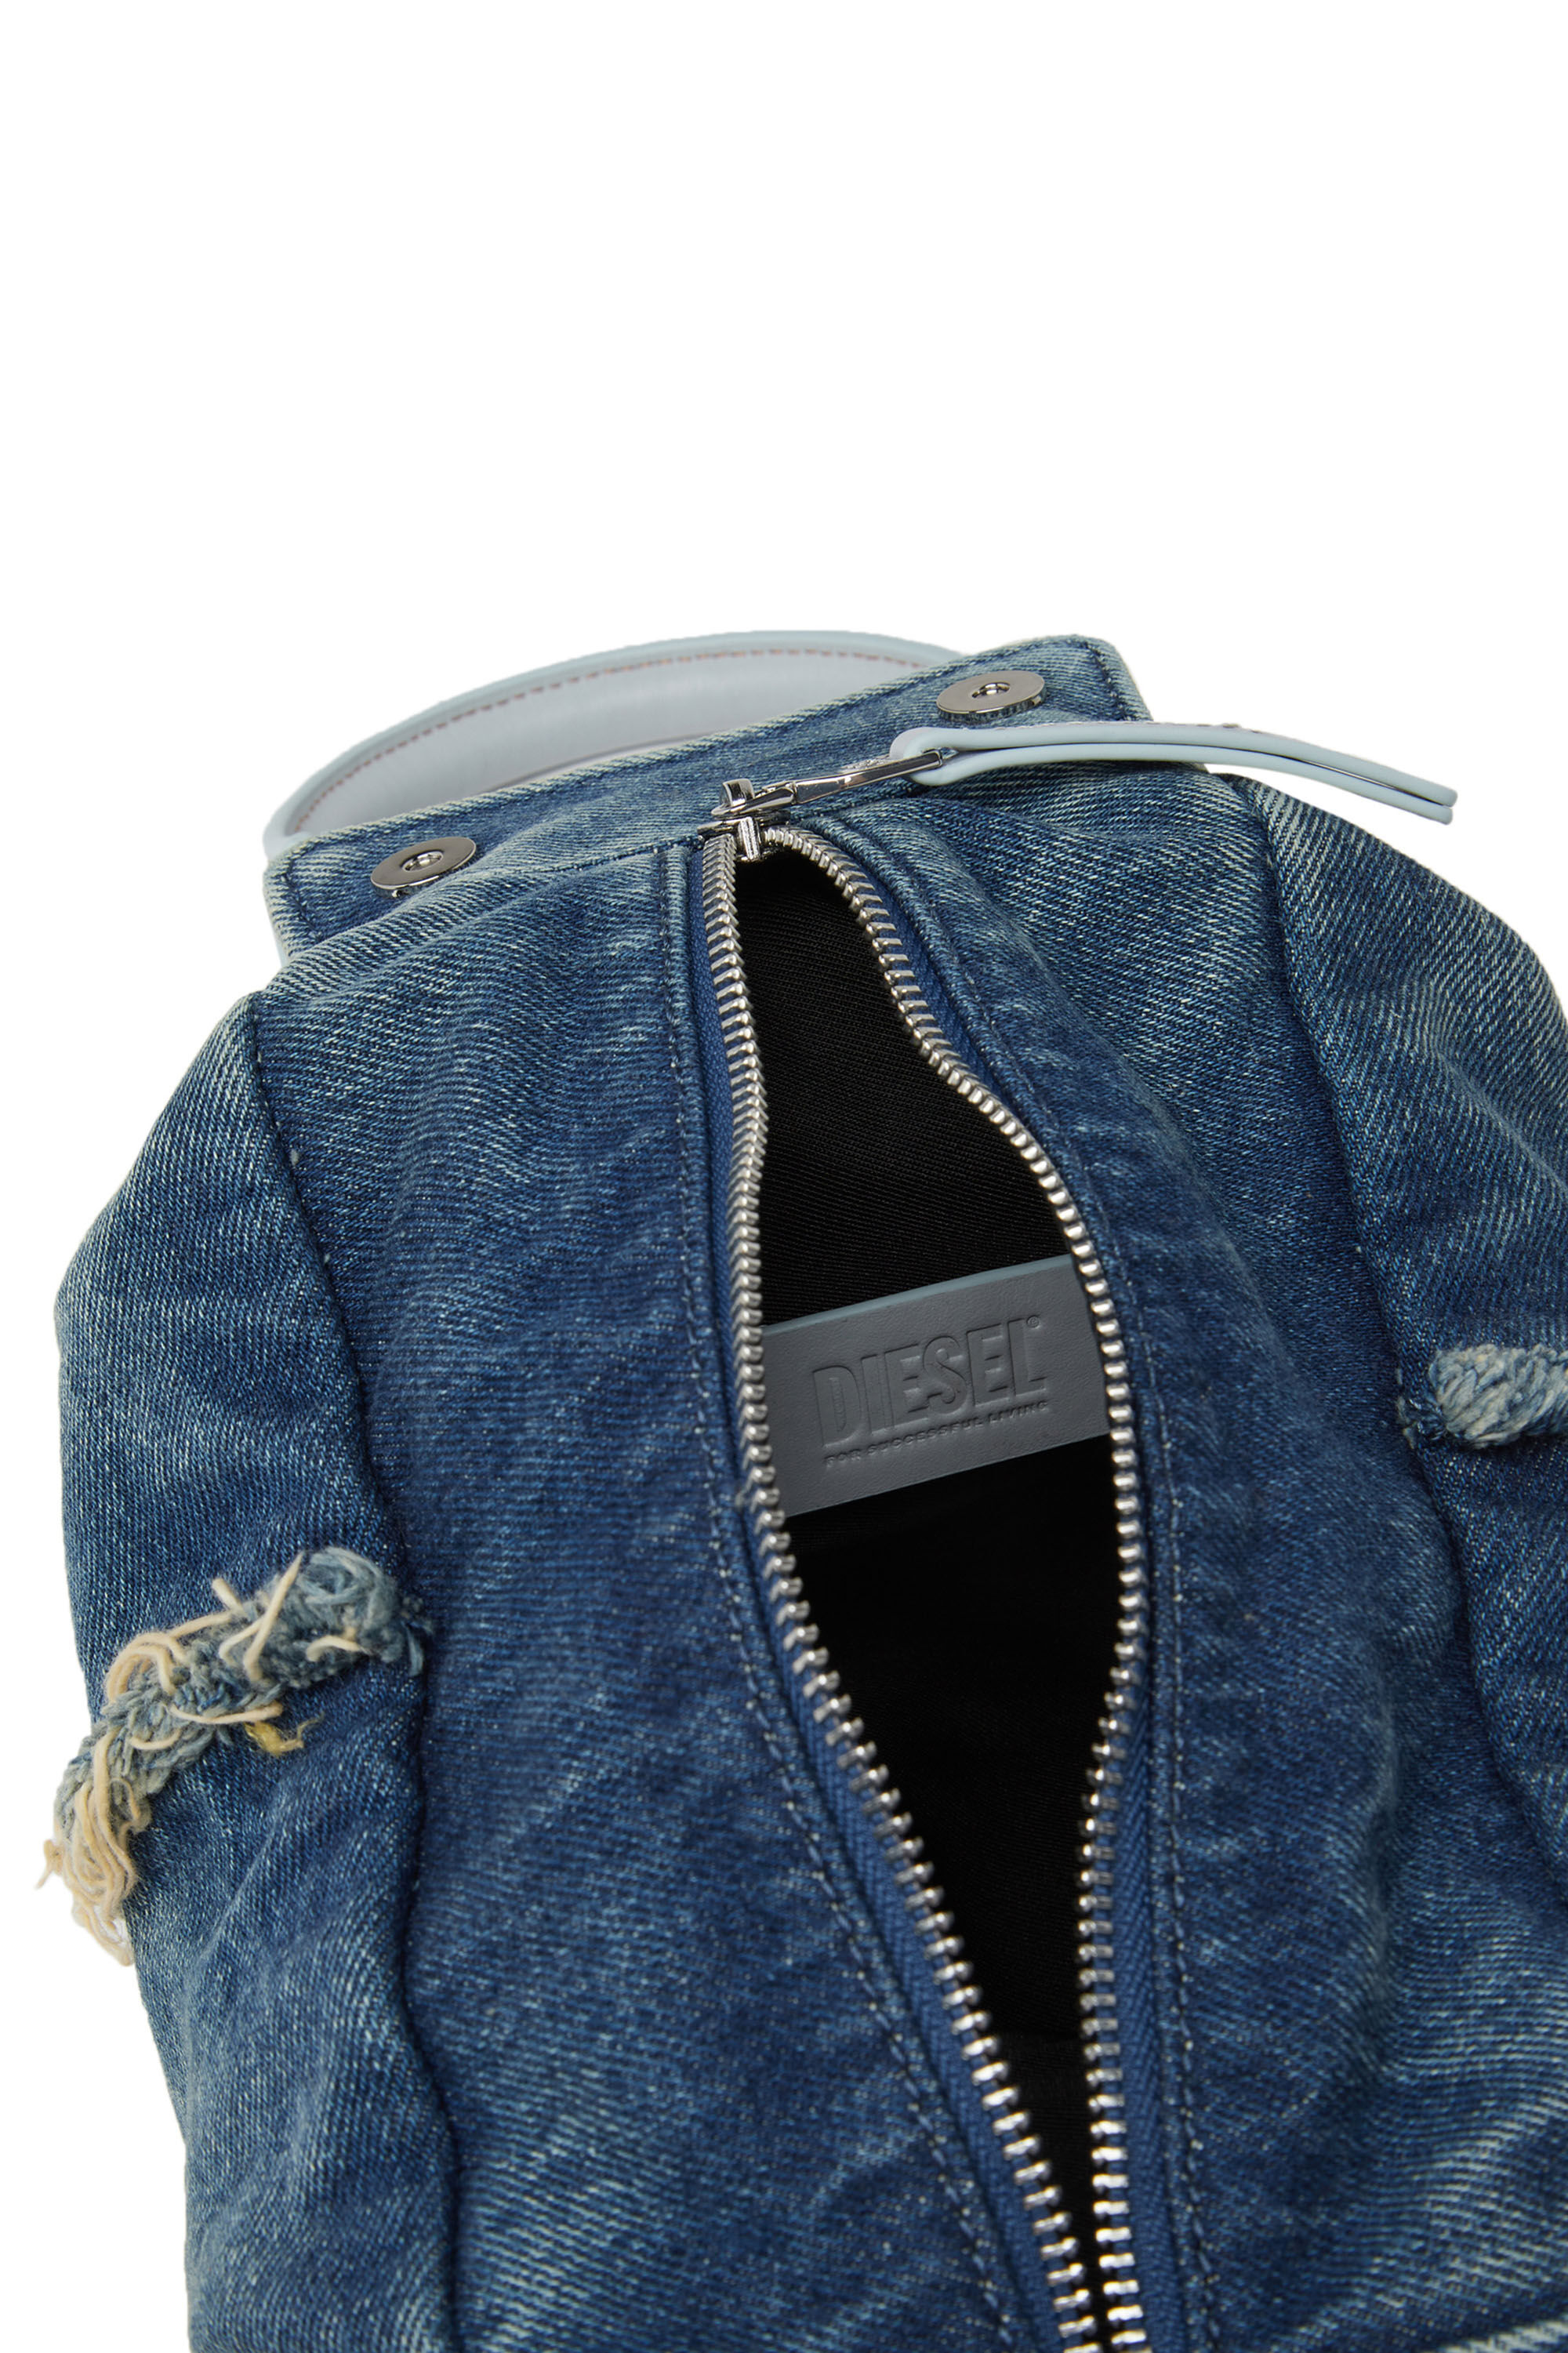 D-VINA-XS Woman: Handbag in faded and quilted denim | Diesel